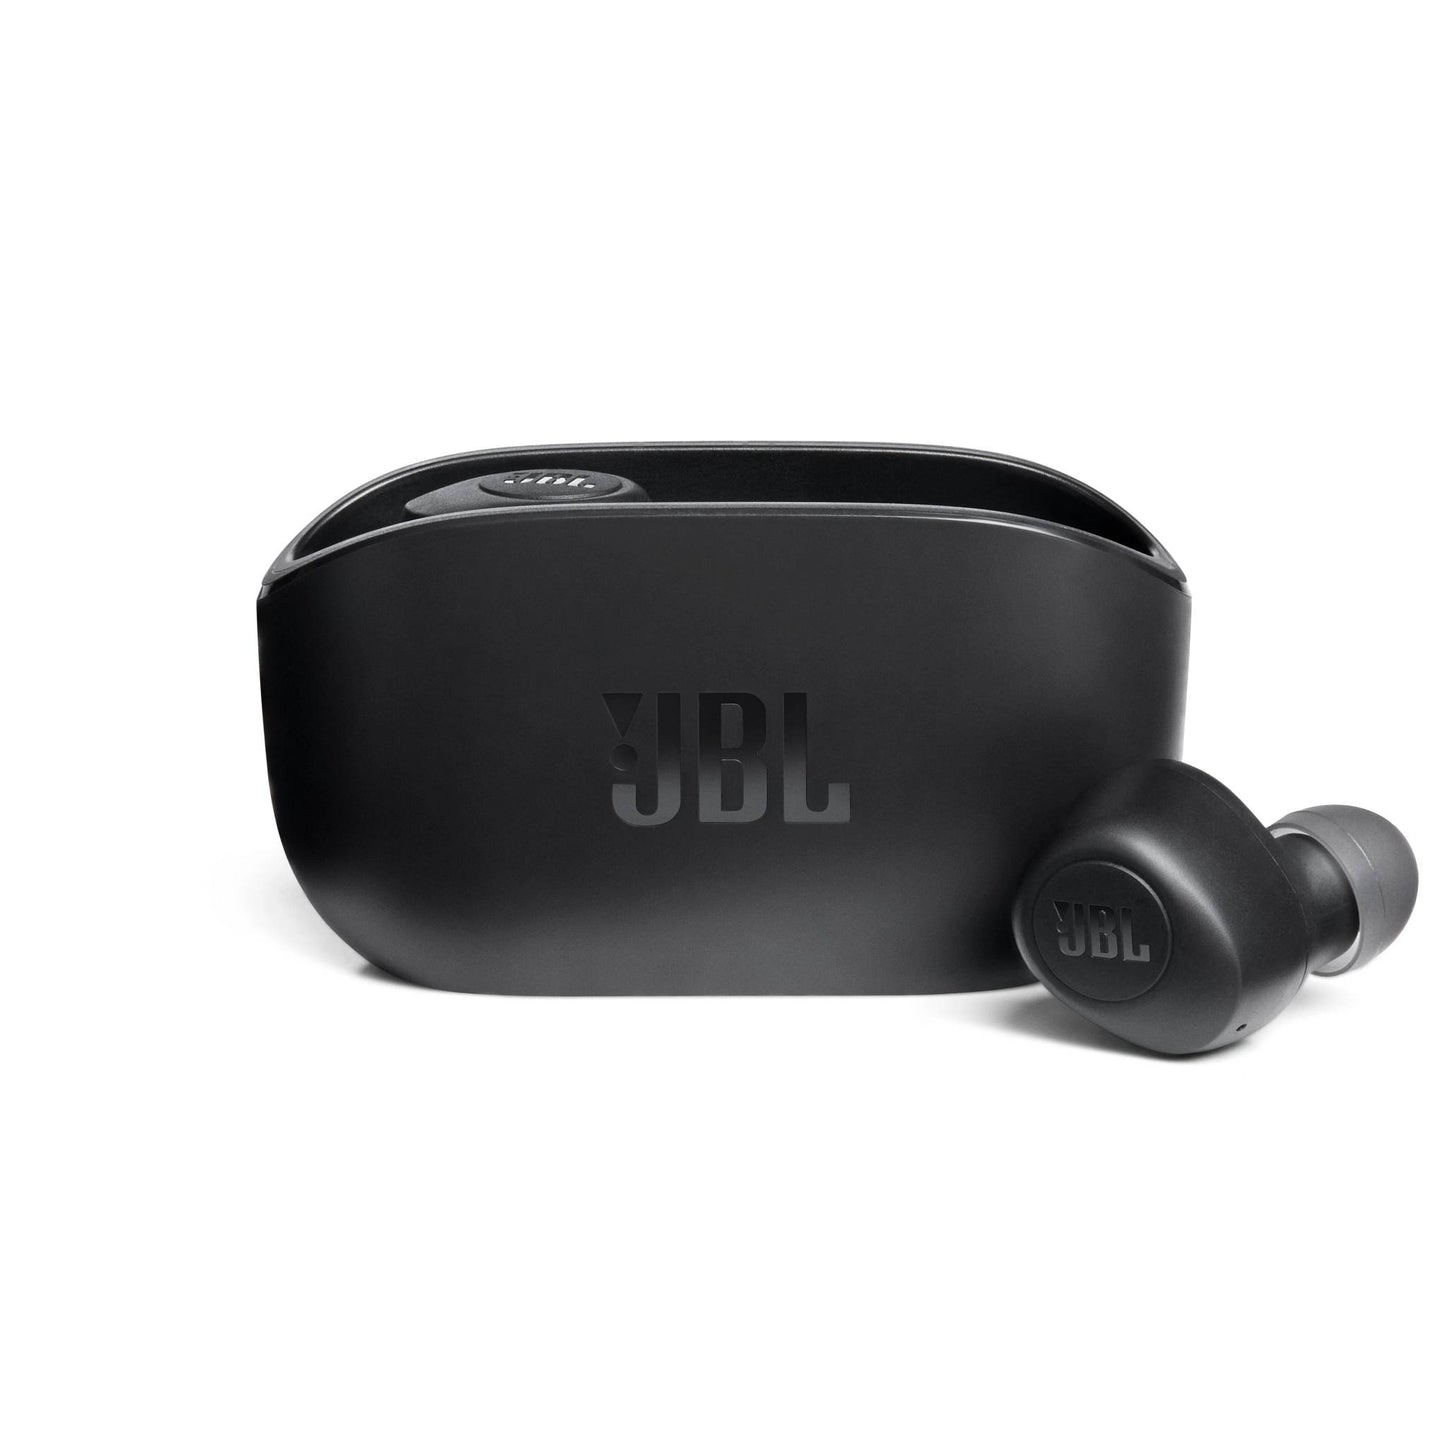 JBL Wave 100 True Wireless Bluethooth In-Ear Headphones, pocket earphones with JBL Deep Bass sound and Dual Connect, 5+15 hours battery life, black color